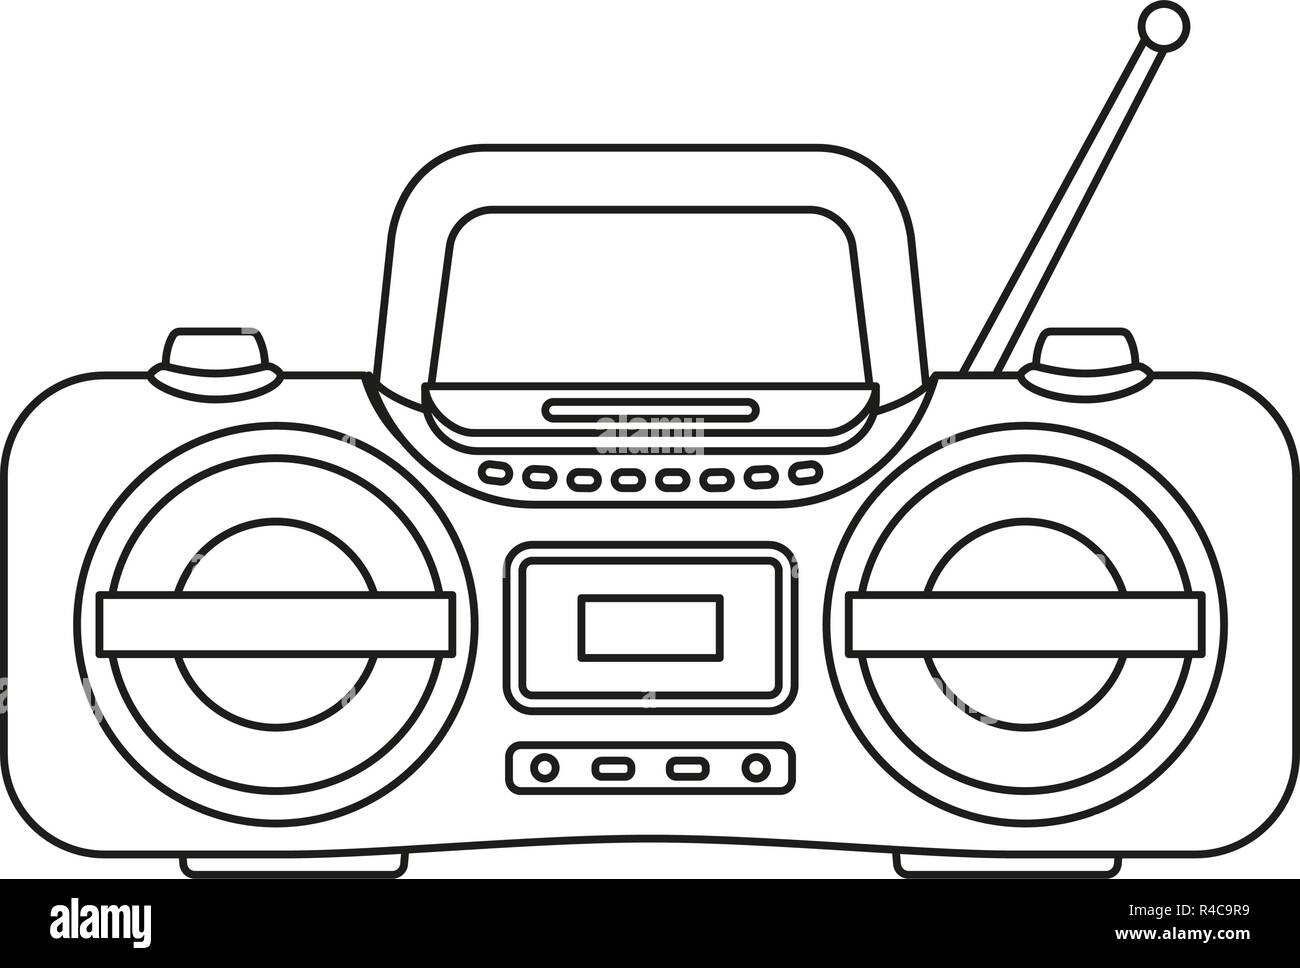 Line art black and white boombox Stock Vector